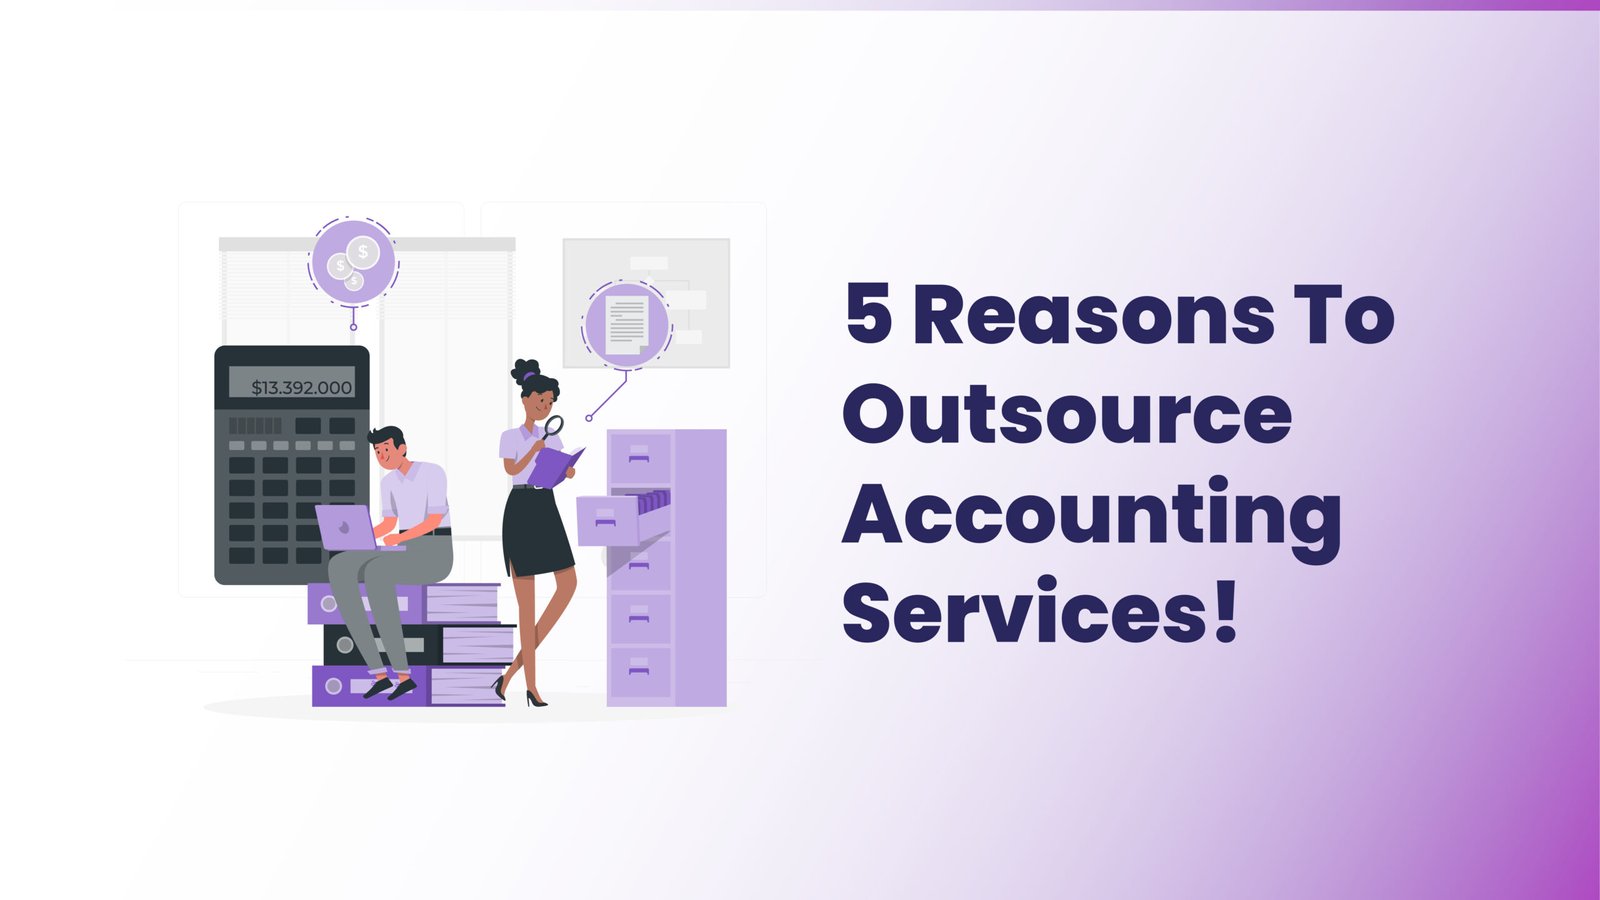 5 Reasons To Outsource Accounting Services